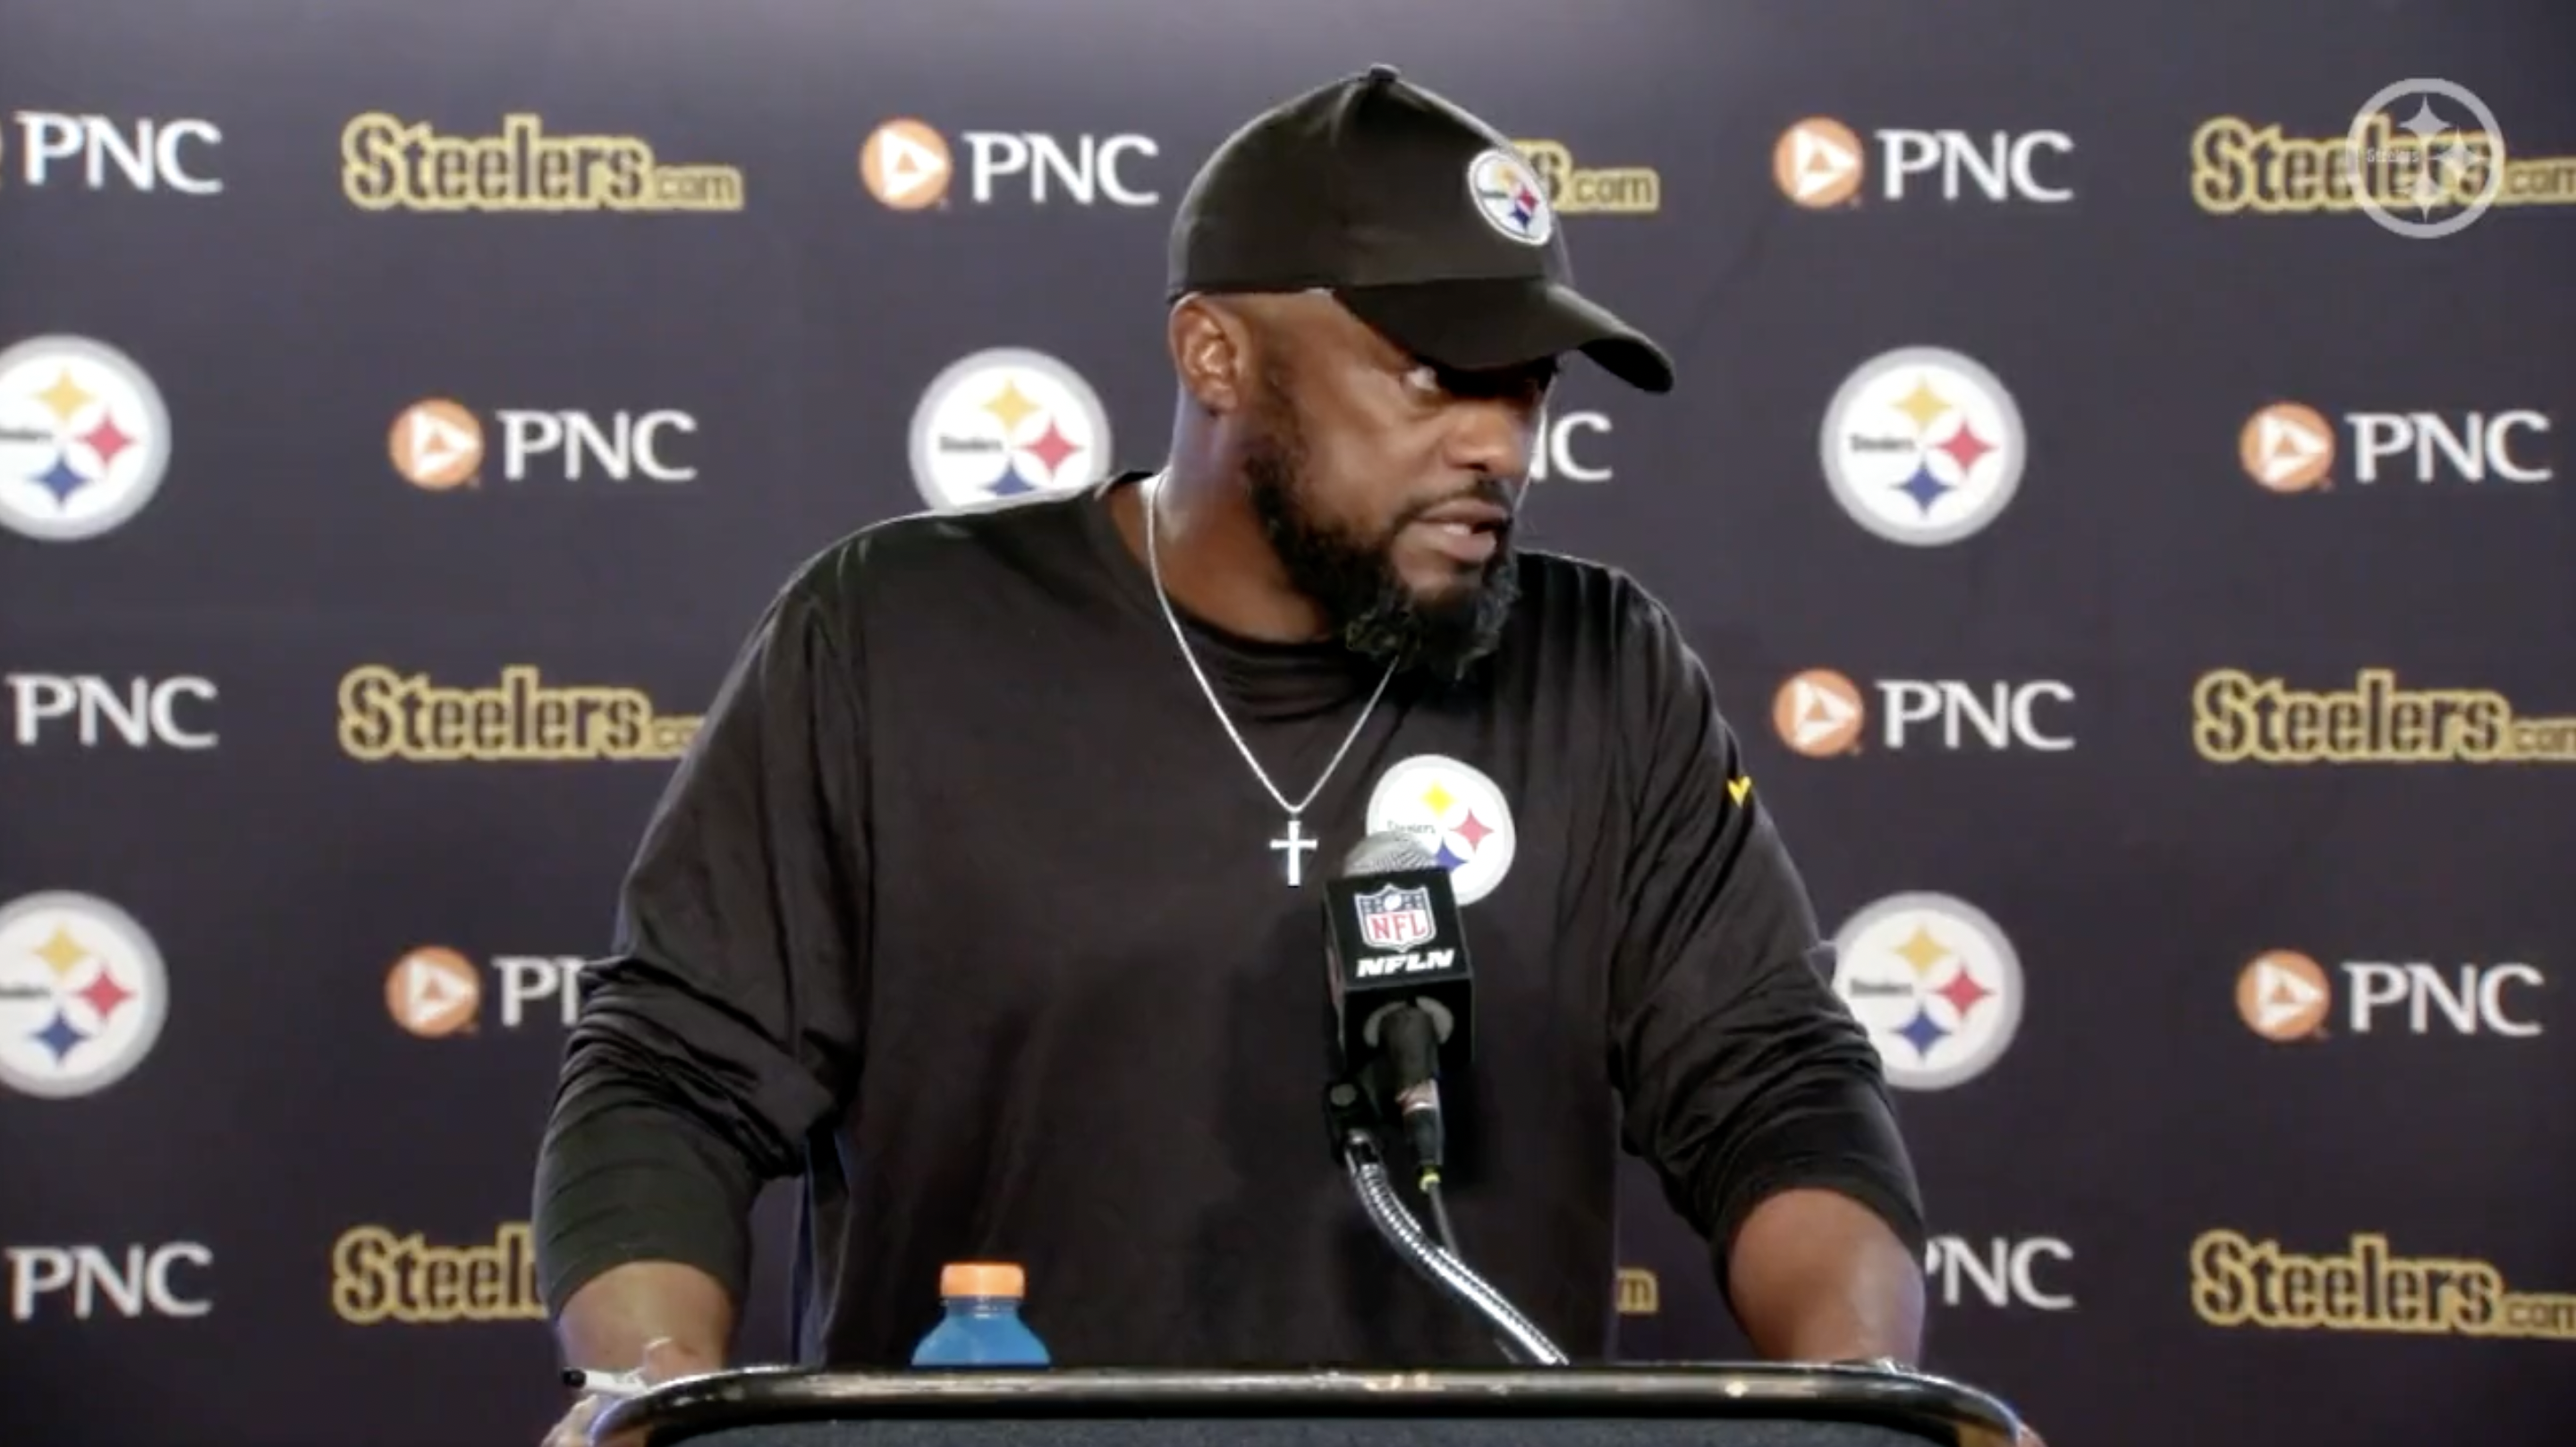 Mike Tomlin Confirms 'Changes' Are Coming To Steelers After Loss vs Texans  - Daily Snark